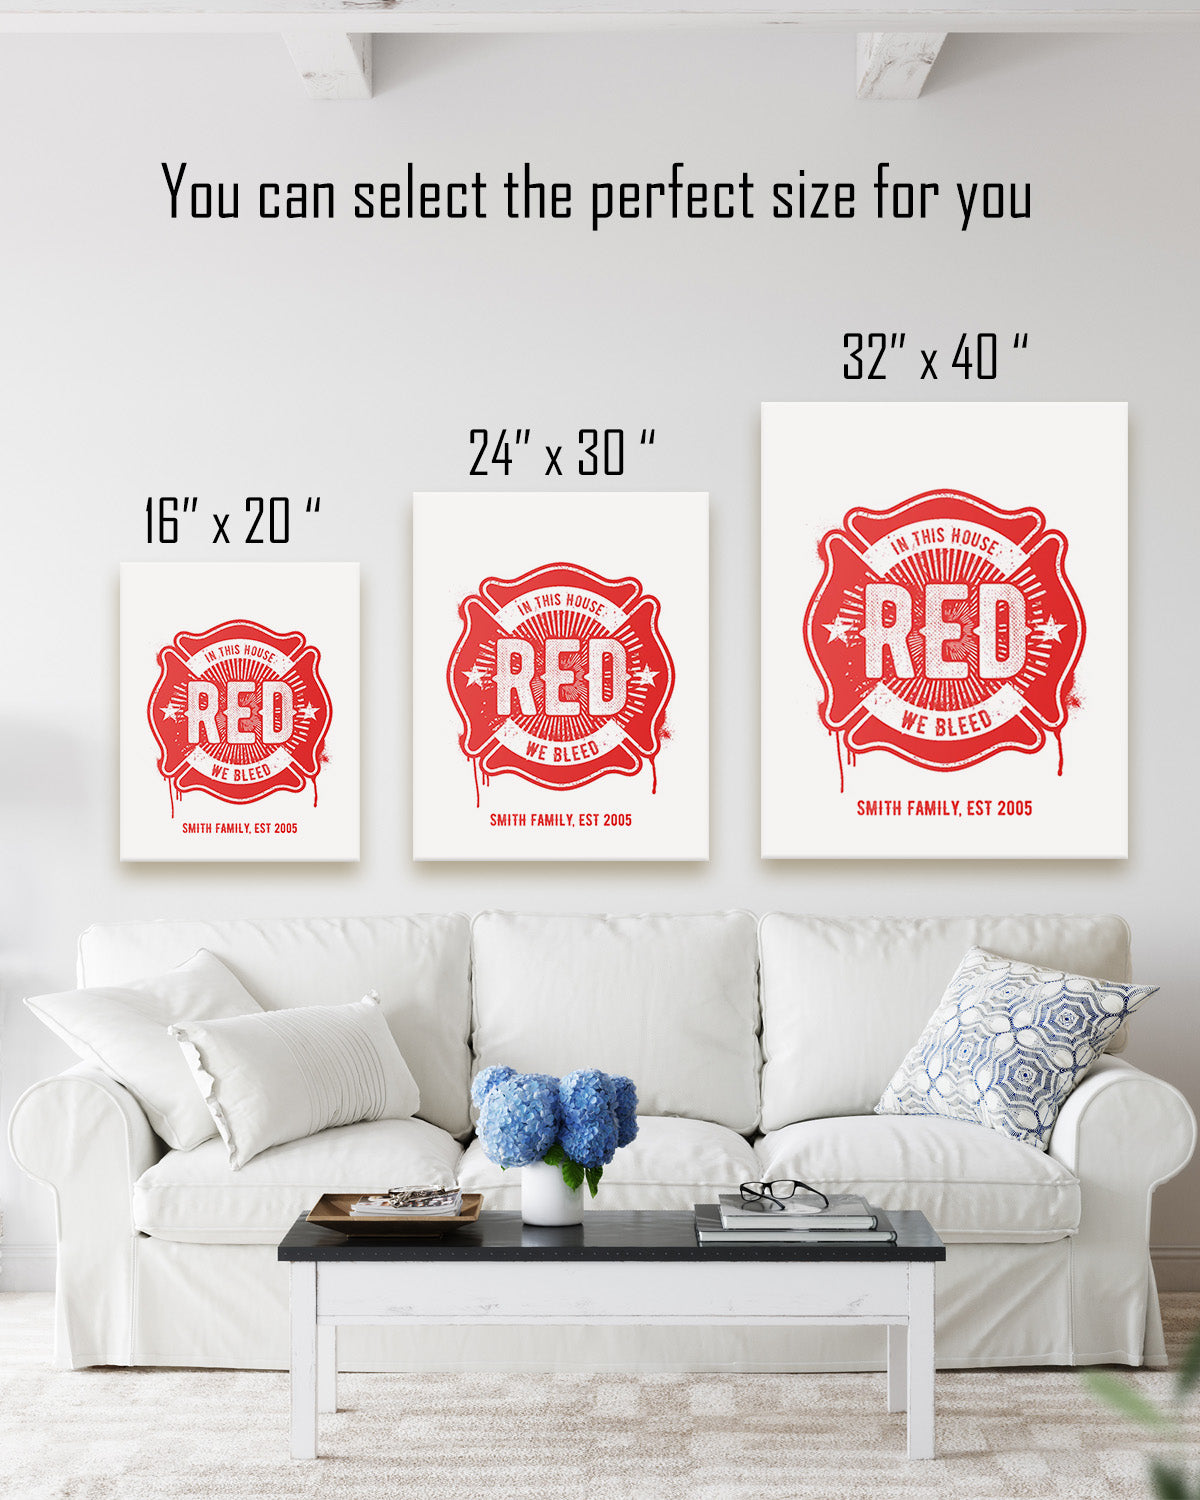 Customizable Firefighter - In This House We Bleed Red (FAMILY NAME & YEAR) - Wall Decor Art Canvas with a white background